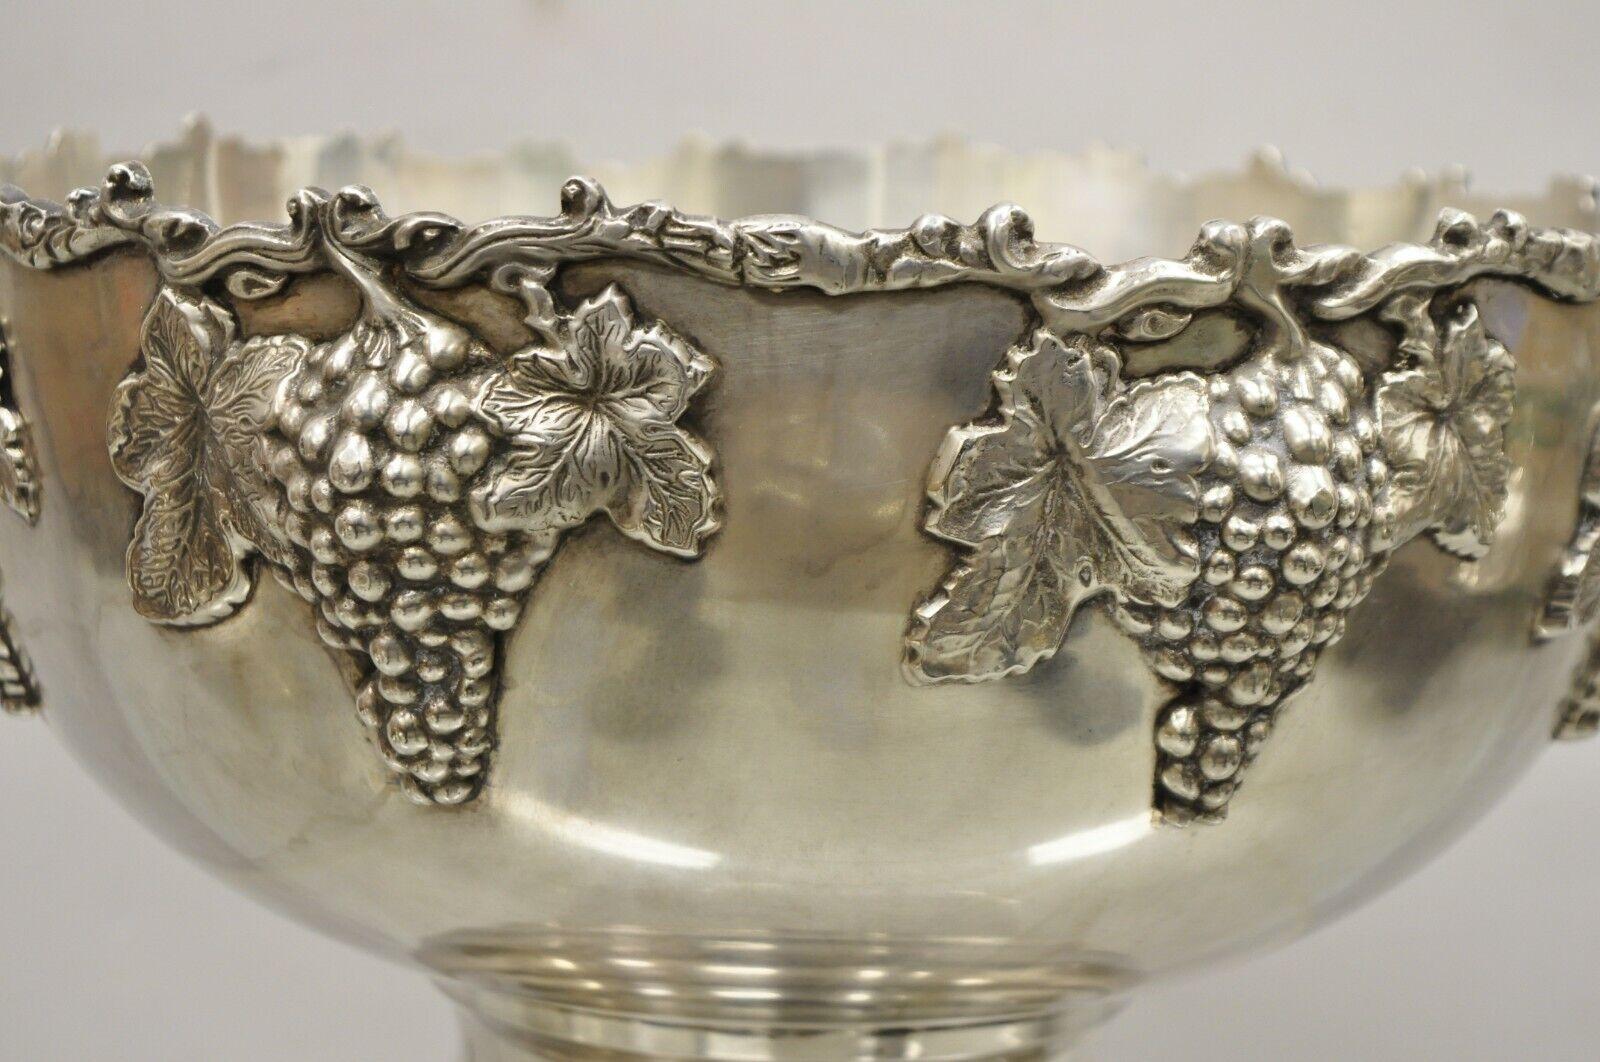 Vintage silver plate grapevine grape cluster punch bowl champagne wine chiller bucket. Item features a grape cluster pattern throughout, very nice vintage item, unmarked, great style and form. Circa mid 20th century. Measurements: 11